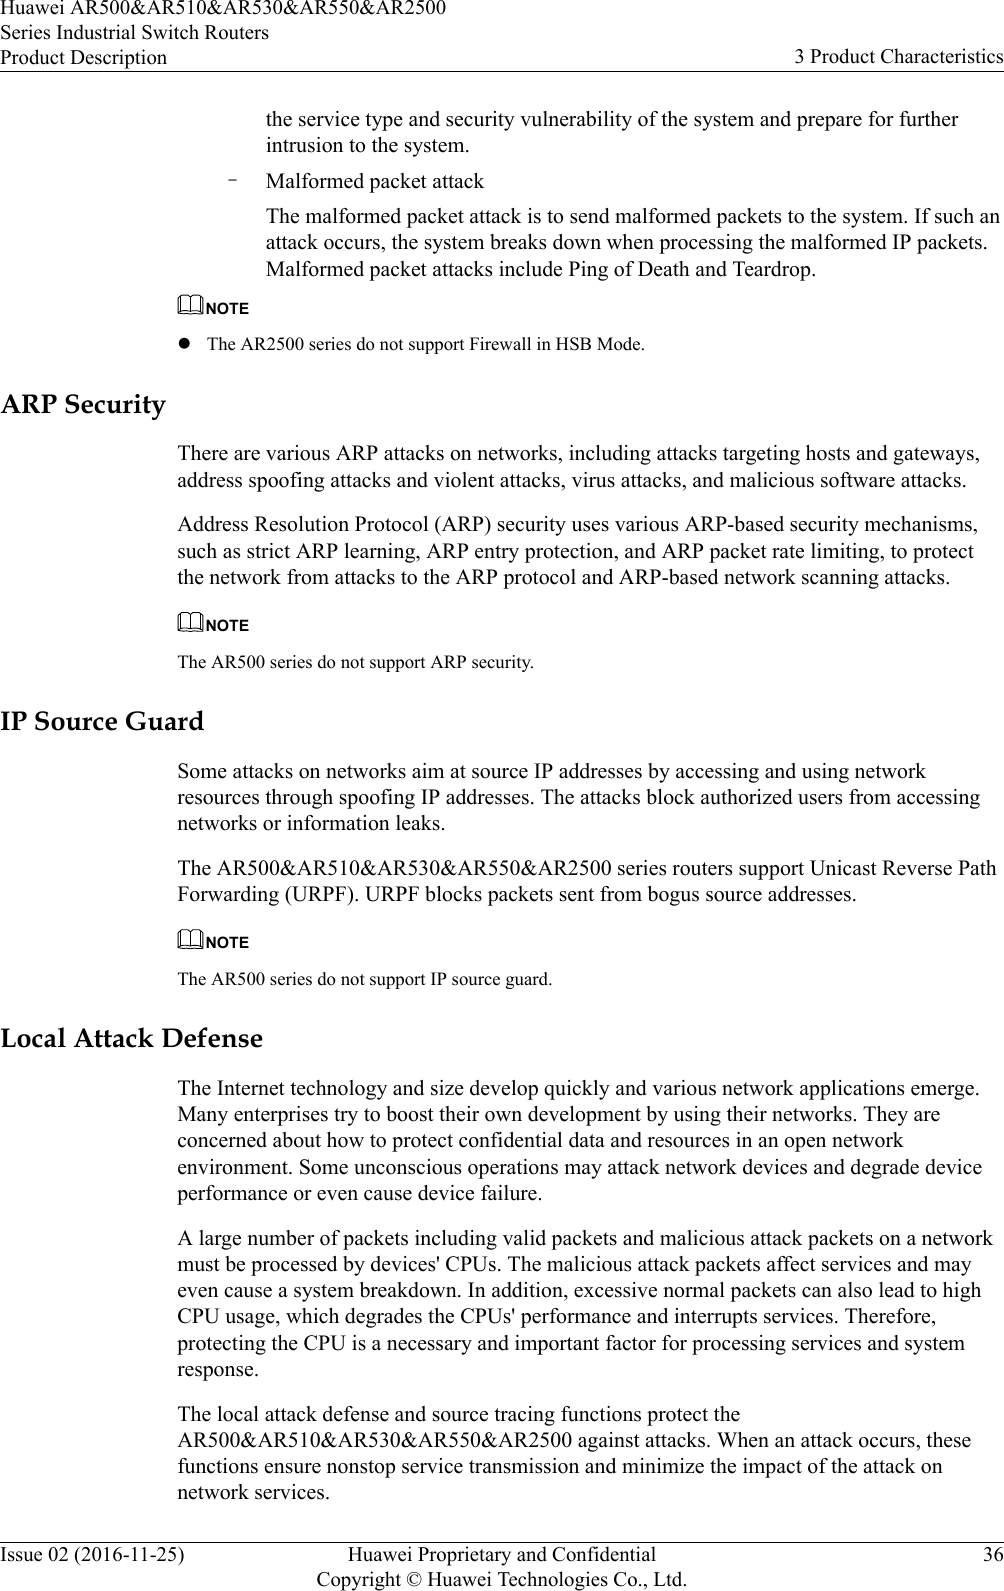 the service type and security vulnerability of the system and prepare for furtherintrusion to the system.–Malformed packet attackThe malformed packet attack is to send malformed packets to the system. If such anattack occurs, the system breaks down when processing the malformed IP packets.Malformed packet attacks include Ping of Death and Teardrop.NOTElThe AR2500 series do not support Firewall in HSB Mode.ARP SecurityThere are various ARP attacks on networks, including attacks targeting hosts and gateways,address spoofing attacks and violent attacks, virus attacks, and malicious software attacks.Address Resolution Protocol (ARP) security uses various ARP-based security mechanisms,such as strict ARP learning, ARP entry protection, and ARP packet rate limiting, to protectthe network from attacks to the ARP protocol and ARP-based network scanning attacks.NOTEThe AR500 series do not support ARP security.IP Source GuardSome attacks on networks aim at source IP addresses by accessing and using networkresources through spoofing IP addresses. The attacks block authorized users from accessingnetworks or information leaks.The AR500&amp;AR510&amp;AR530&amp;AR550&amp;AR2500 series routers support Unicast Reverse PathForwarding (URPF). URPF blocks packets sent from bogus source addresses.NOTEThe AR500 series do not support IP source guard.Local Attack DefenseThe Internet technology and size develop quickly and various network applications emerge.Many enterprises try to boost their own development by using their networks. They areconcerned about how to protect confidential data and resources in an open networkenvironment. Some unconscious operations may attack network devices and degrade deviceperformance or even cause device failure.A large number of packets including valid packets and malicious attack packets on a networkmust be processed by devices&apos; CPUs. The malicious attack packets affect services and mayeven cause a system breakdown. In addition, excessive normal packets can also lead to highCPU usage, which degrades the CPUs&apos; performance and interrupts services. Therefore,protecting the CPU is a necessary and important factor for processing services and systemresponse.The local attack defense and source tracing functions protect theAR500&amp;AR510&amp;AR530&amp;AR550&amp;AR2500 against attacks. When an attack occurs, thesefunctions ensure nonstop service transmission and minimize the impact of the attack onnetwork services.Huawei AR500&amp;AR510&amp;AR530&amp;AR550&amp;AR2500Series Industrial Switch RoutersProduct Description 3 Product CharacteristicsIssue 02 (2016-11-25) Huawei Proprietary and ConfidentialCopyright © Huawei Technologies Co., Ltd.36